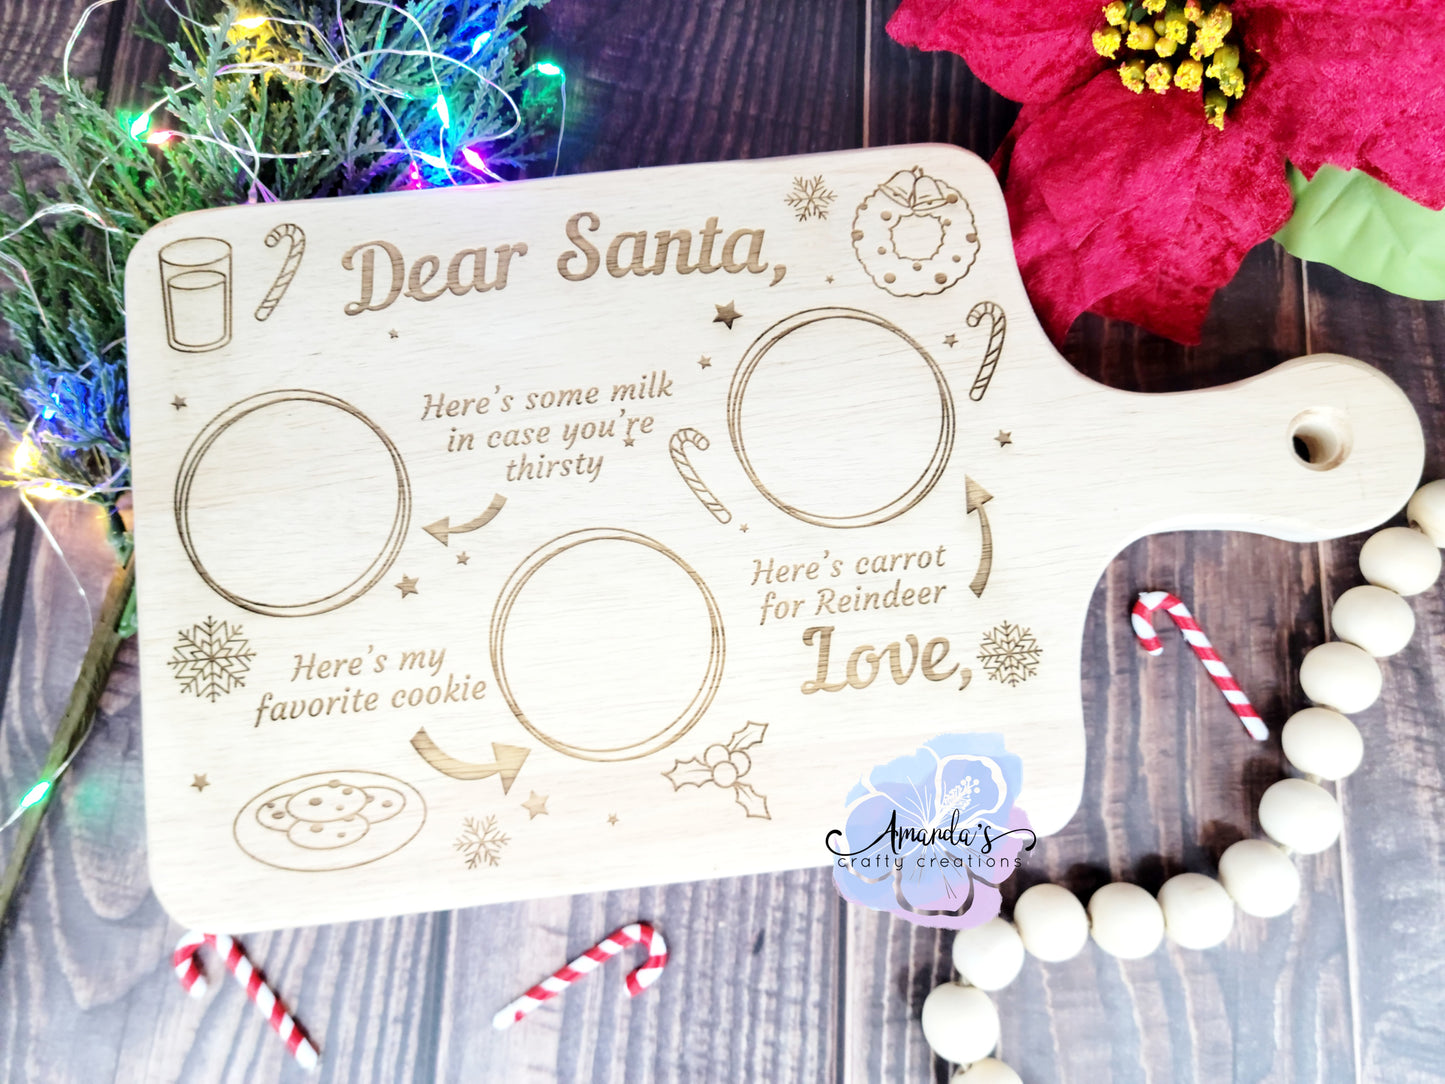 Dear santa have some milk, cookies, and a carrot for the reindeer engraved cutting boards